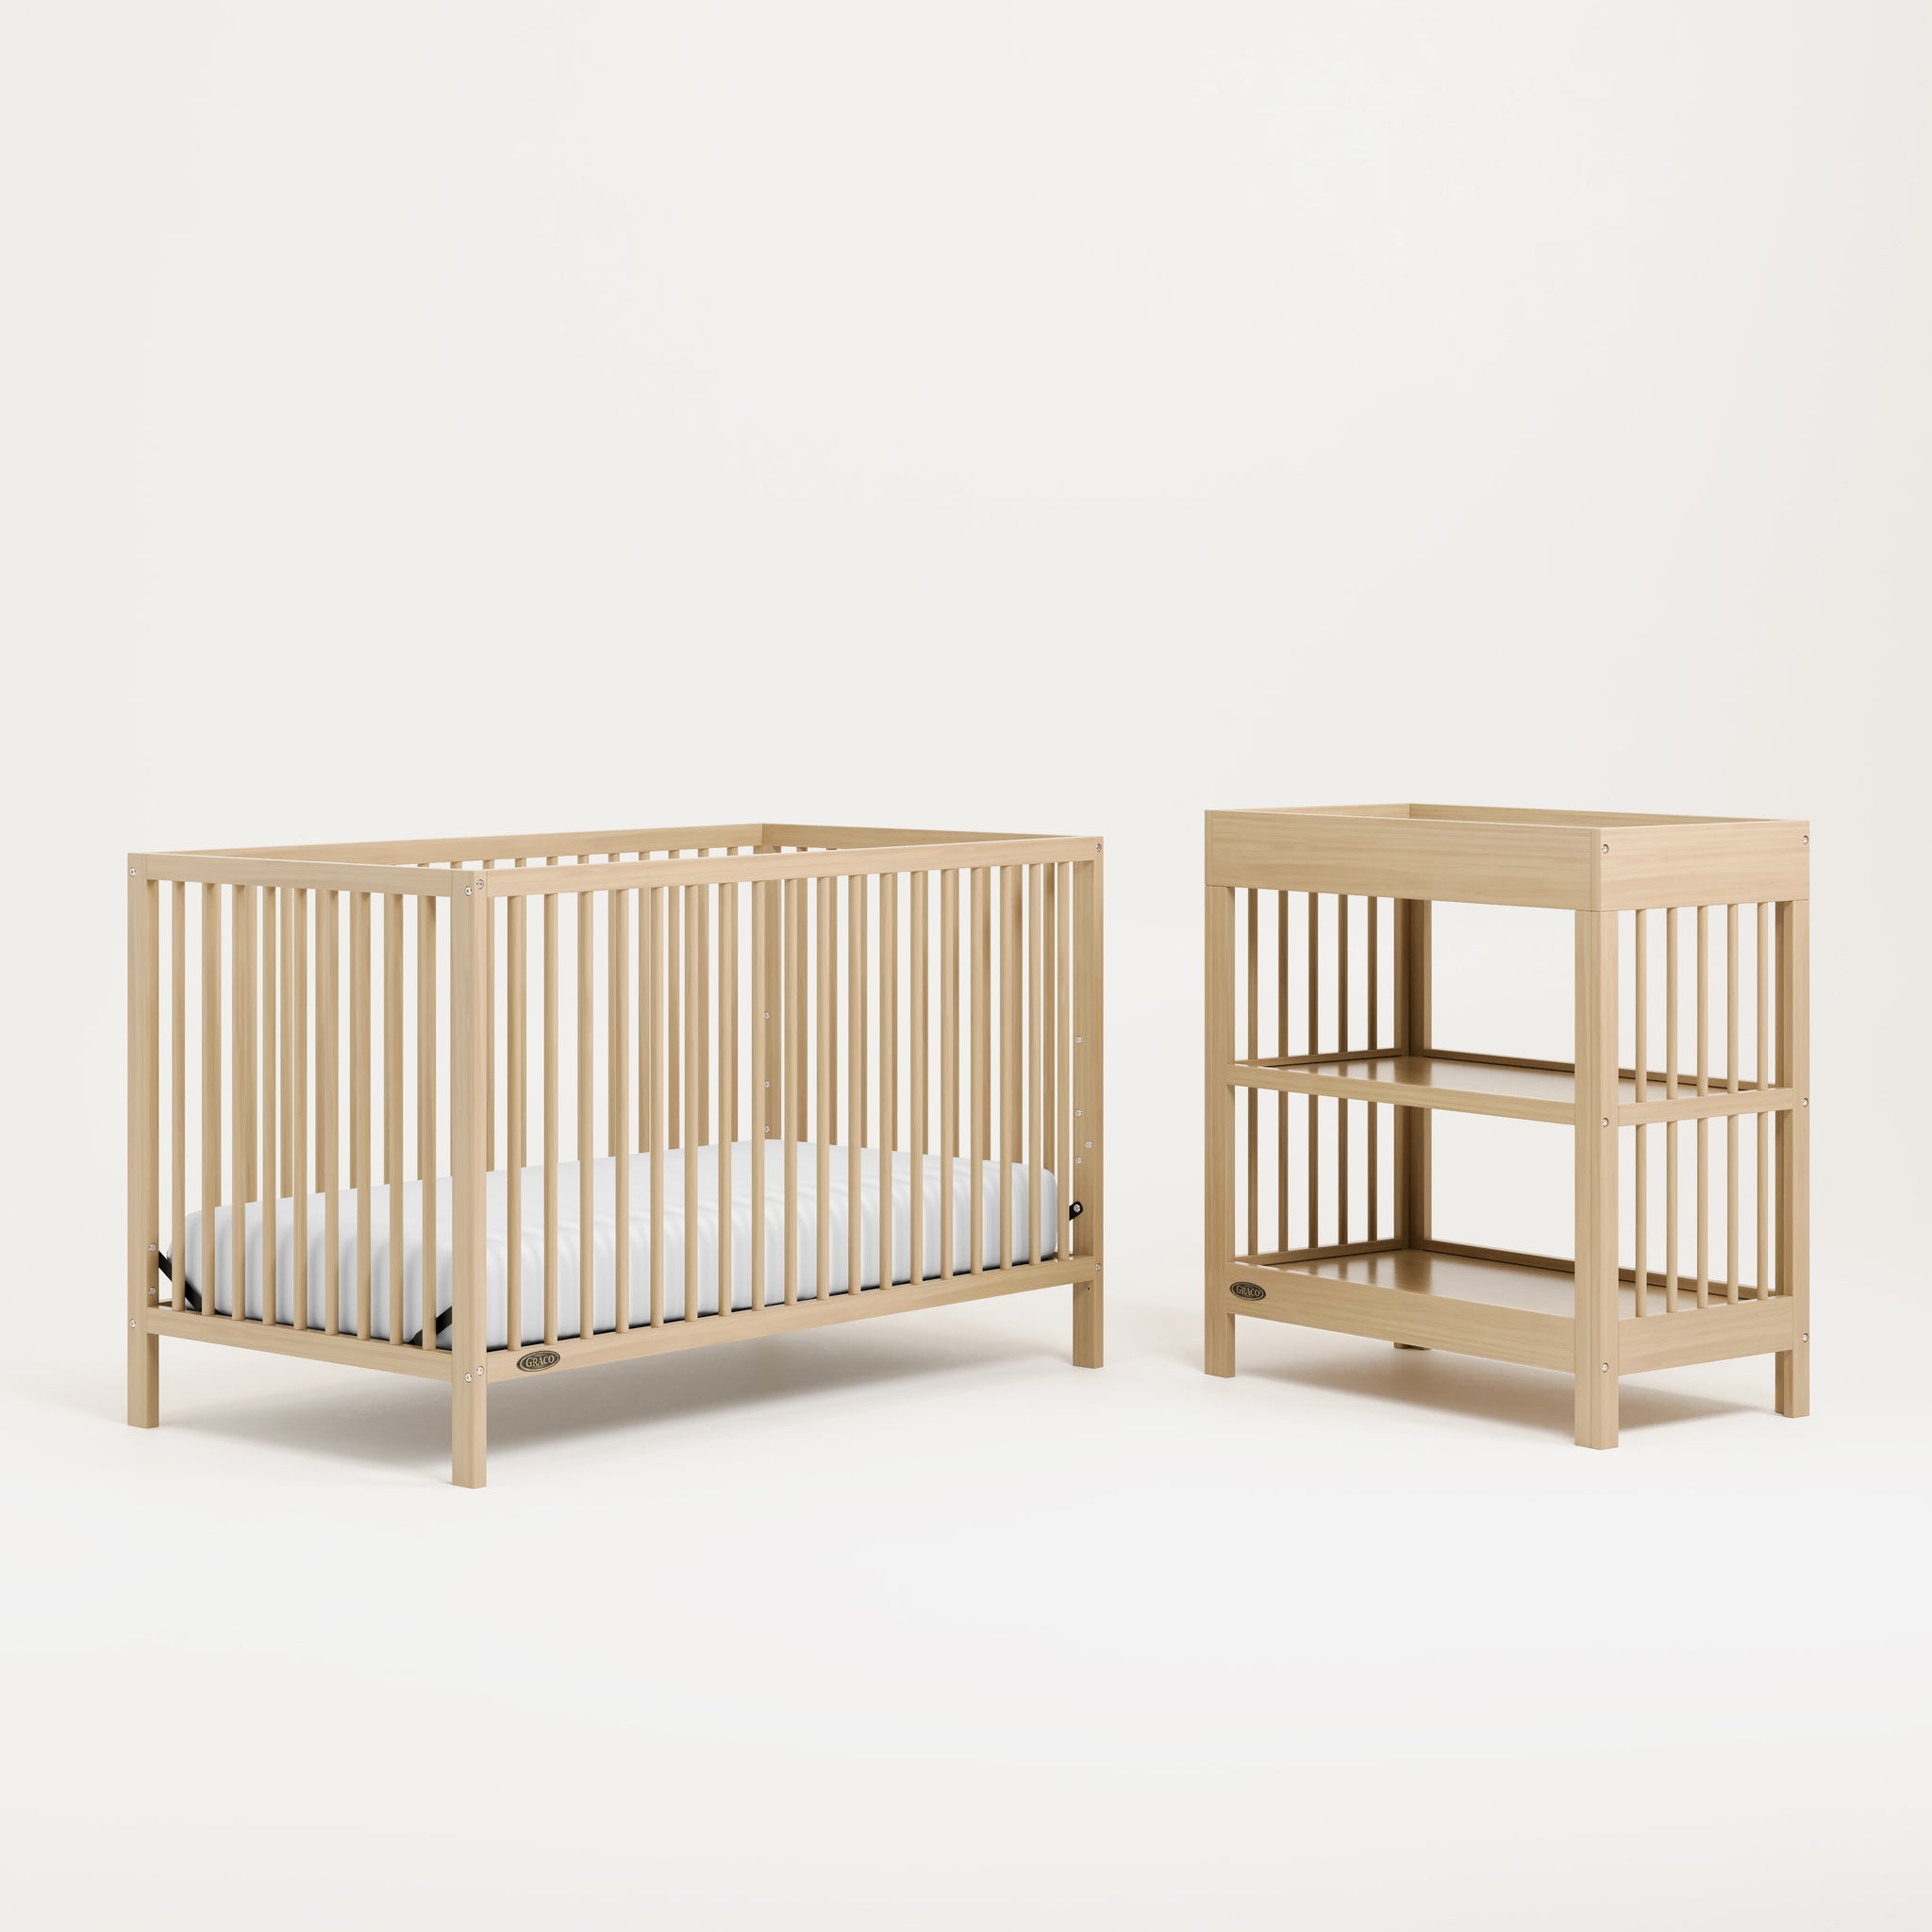 Driftwood crib and changing table